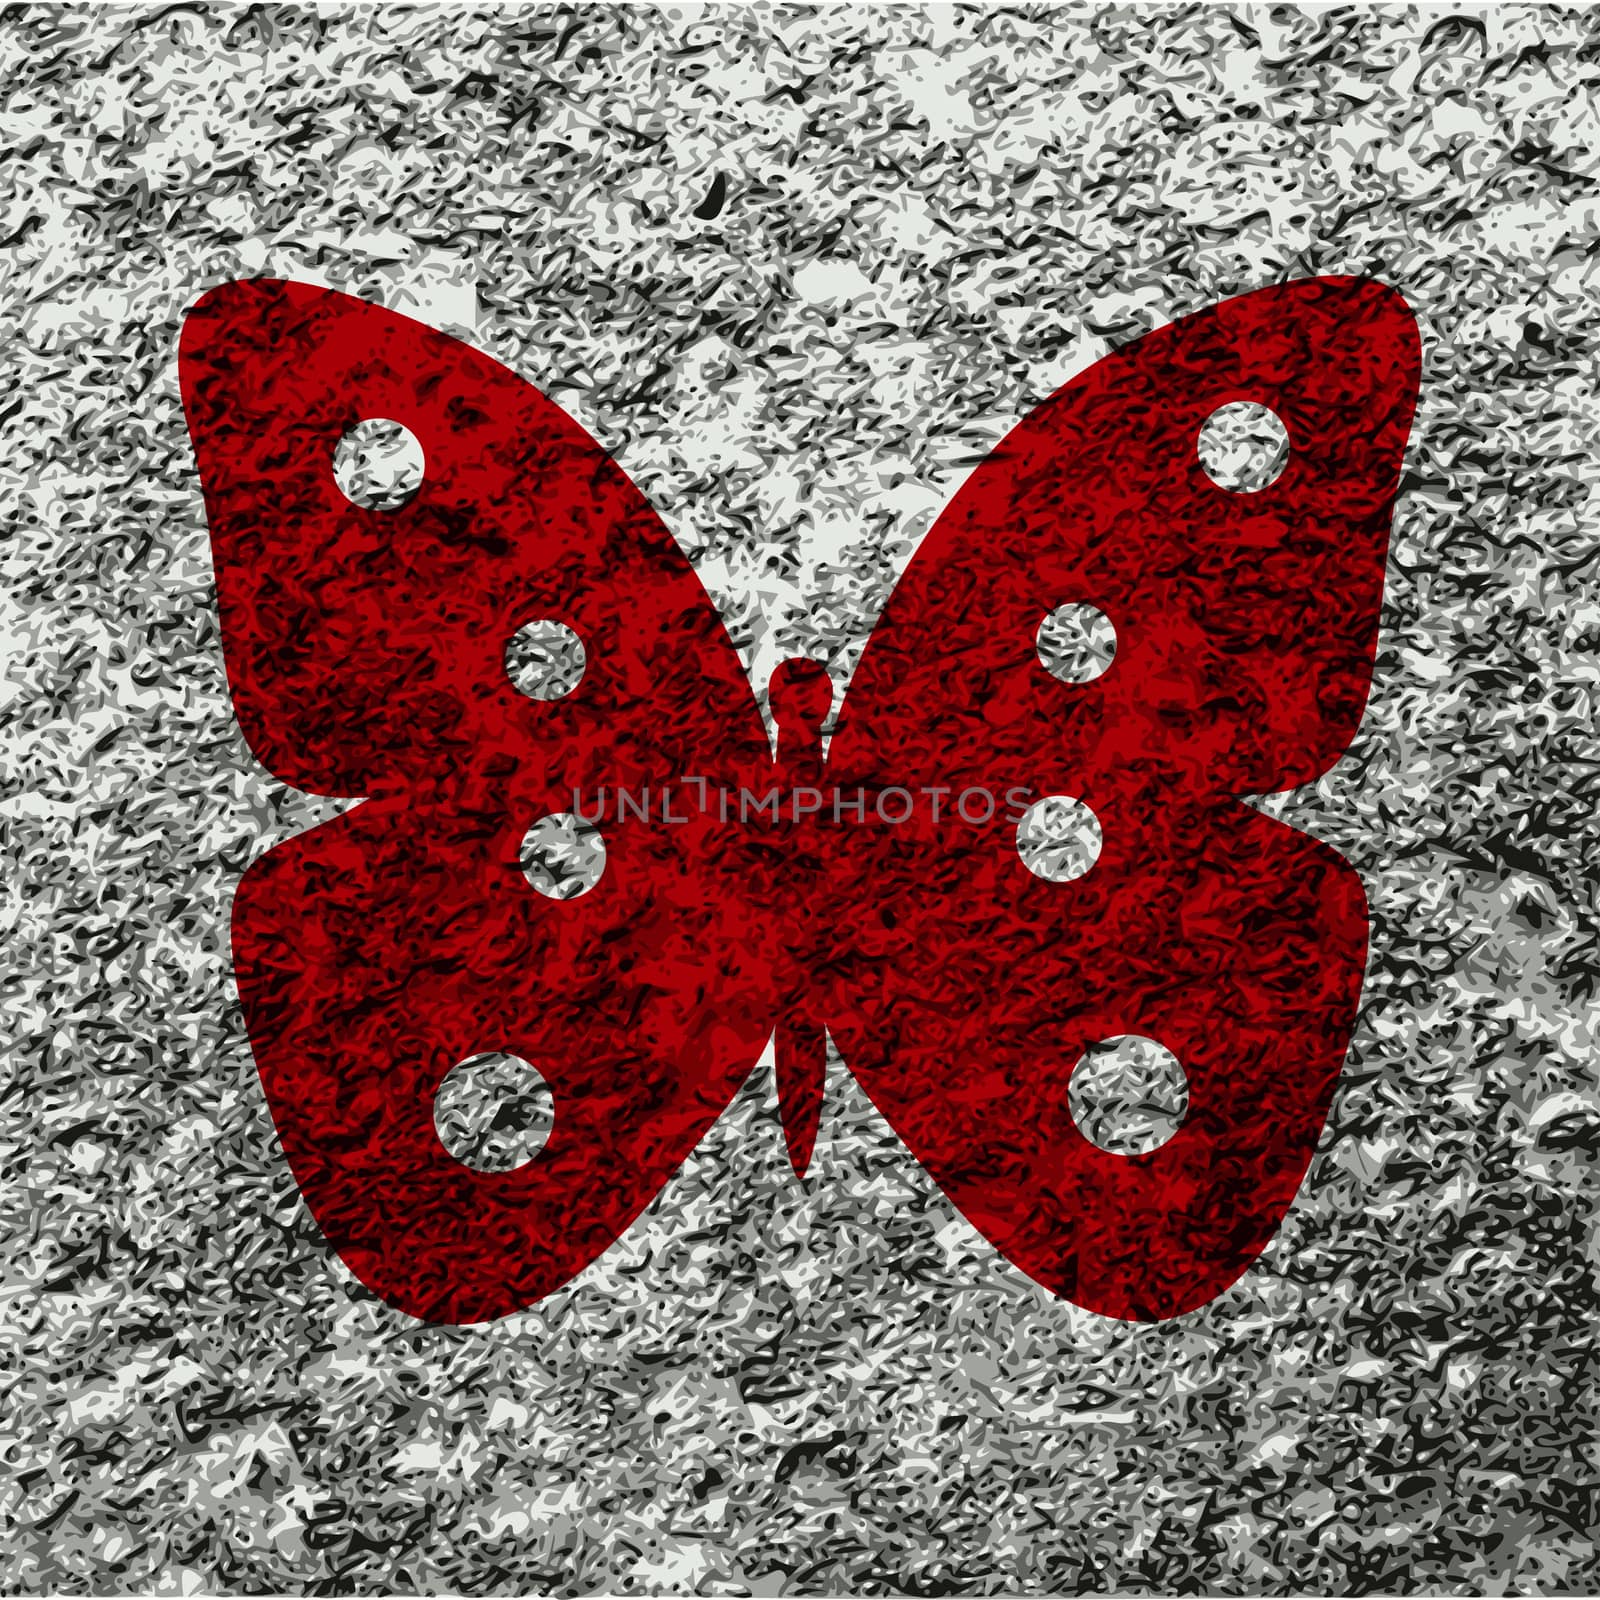 butterfly icon flat design with abstract background.